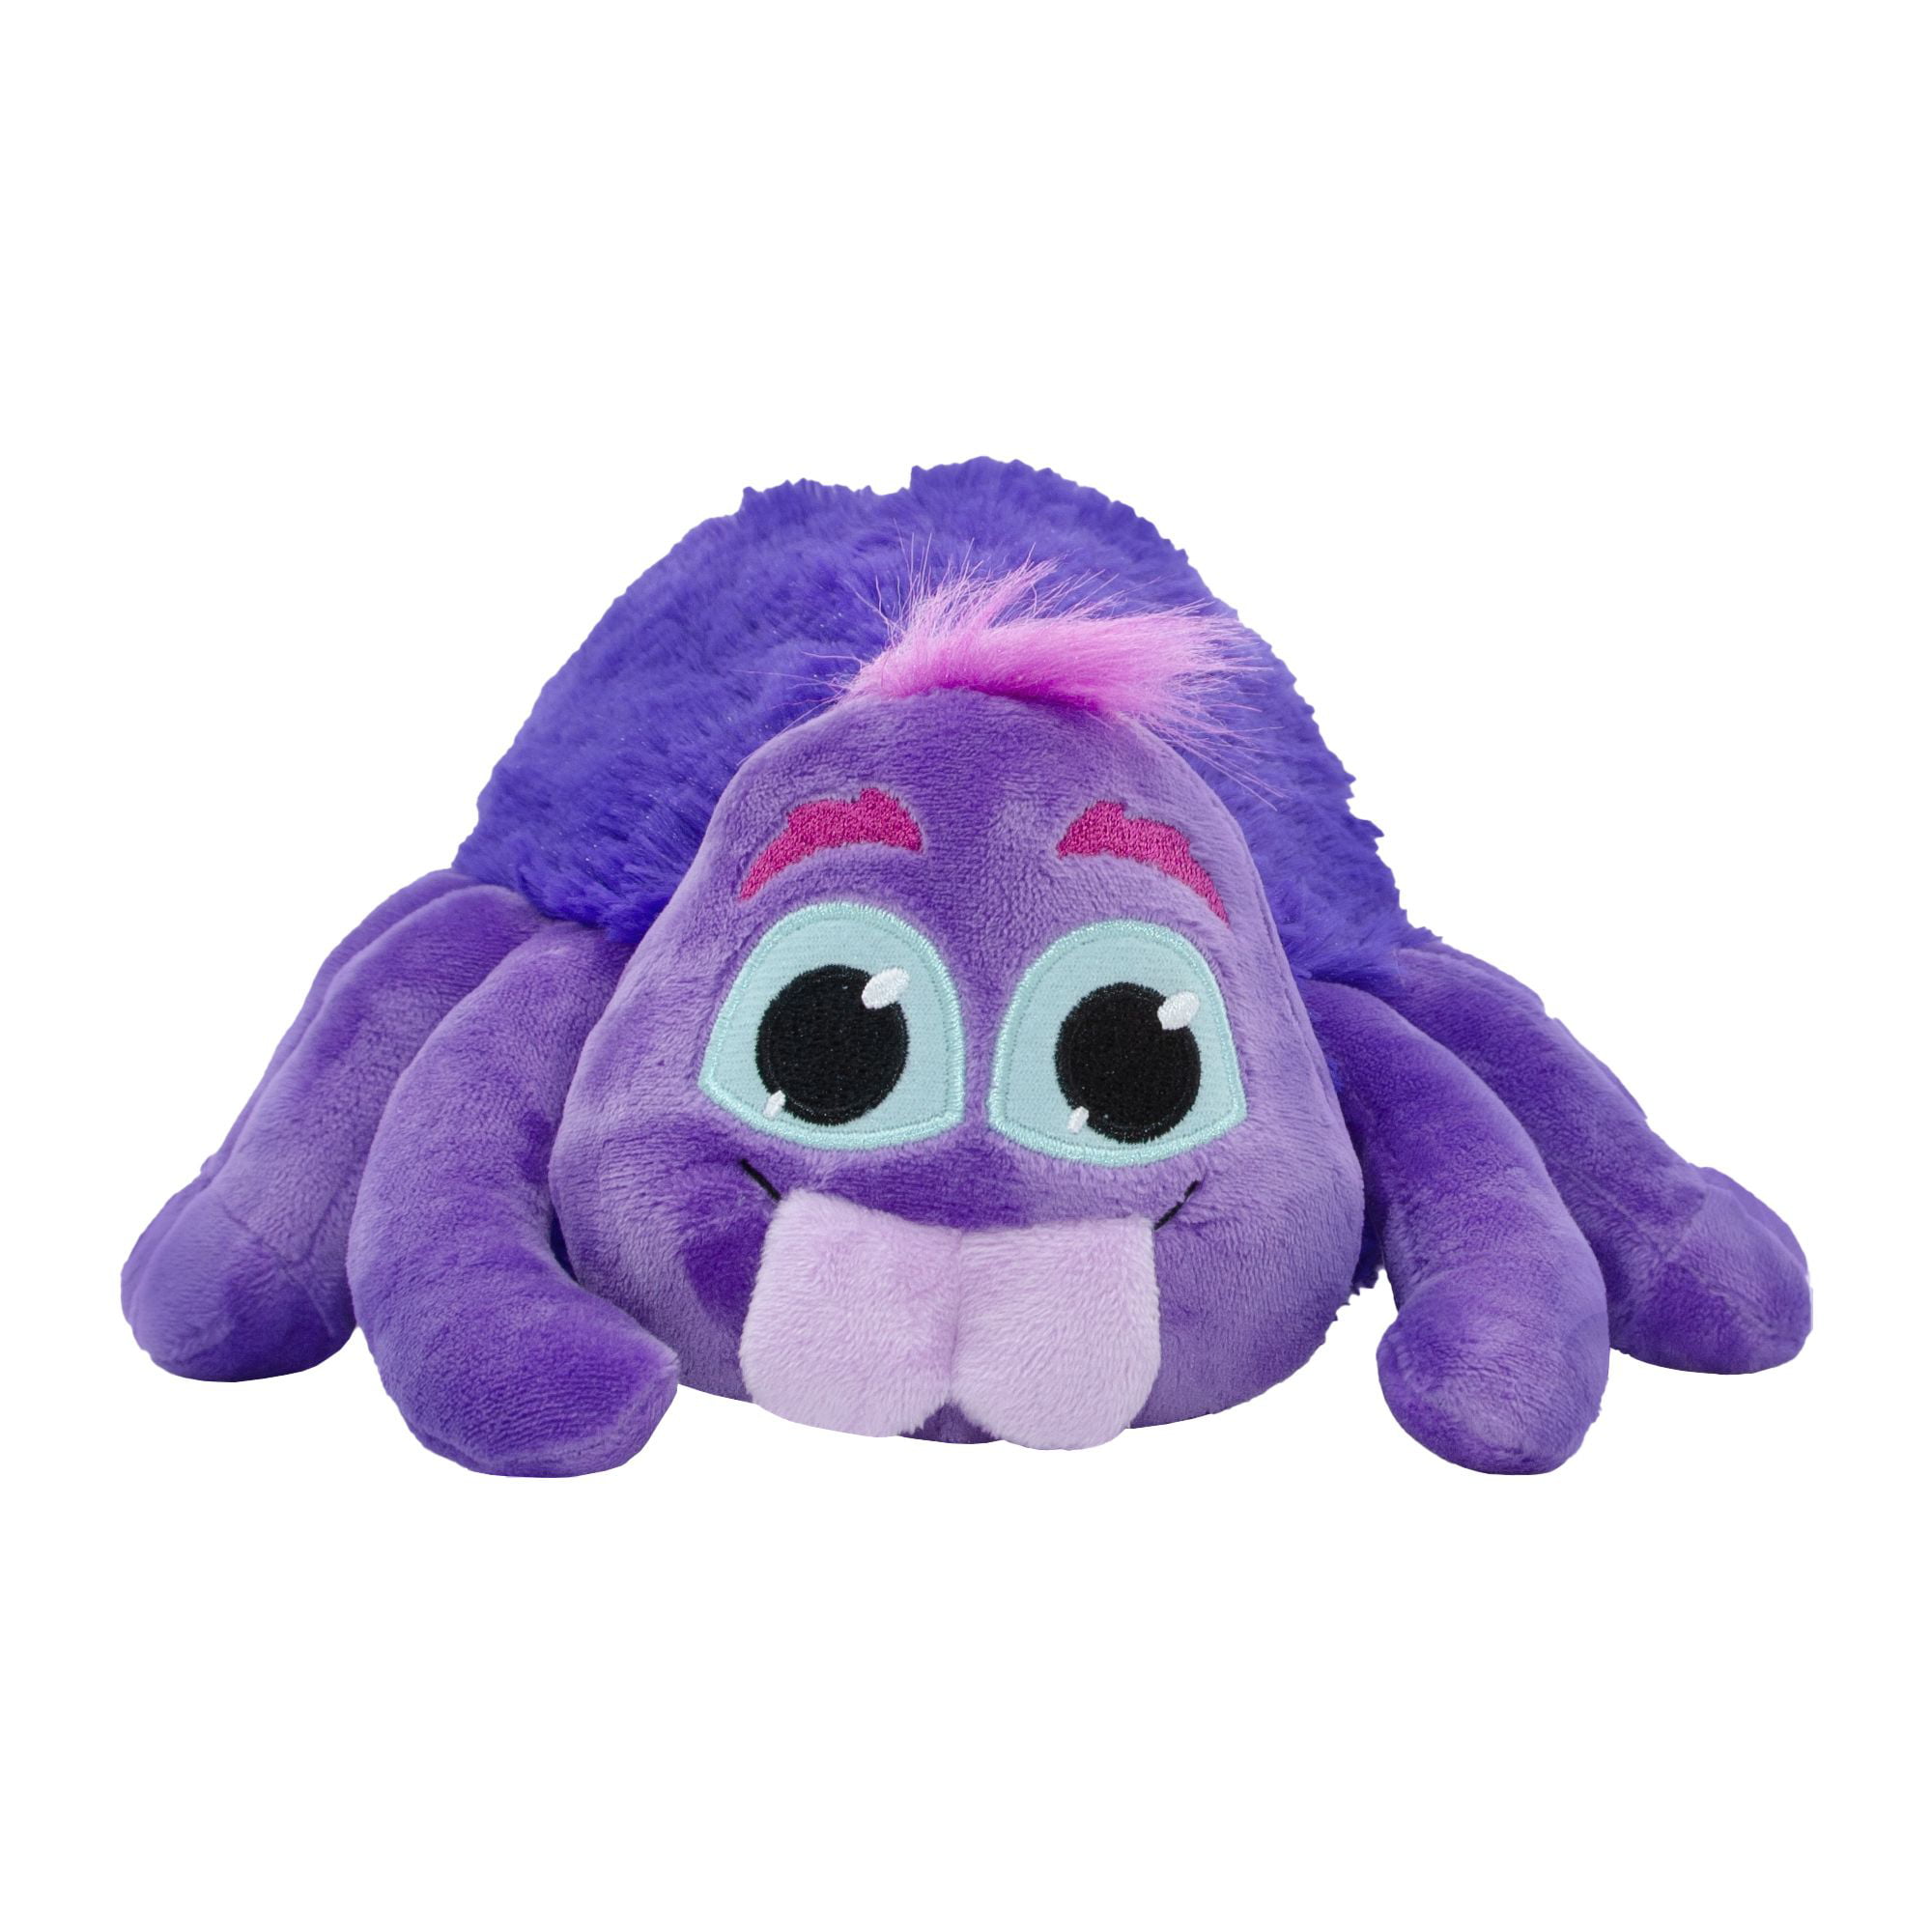 Toikido YuMe Brand Frank Plush Spider - Back to the Outback, 8inch Soft Collectible Cuddle Toy $5.00 + Free S&H w/ Walmart+ or $35+